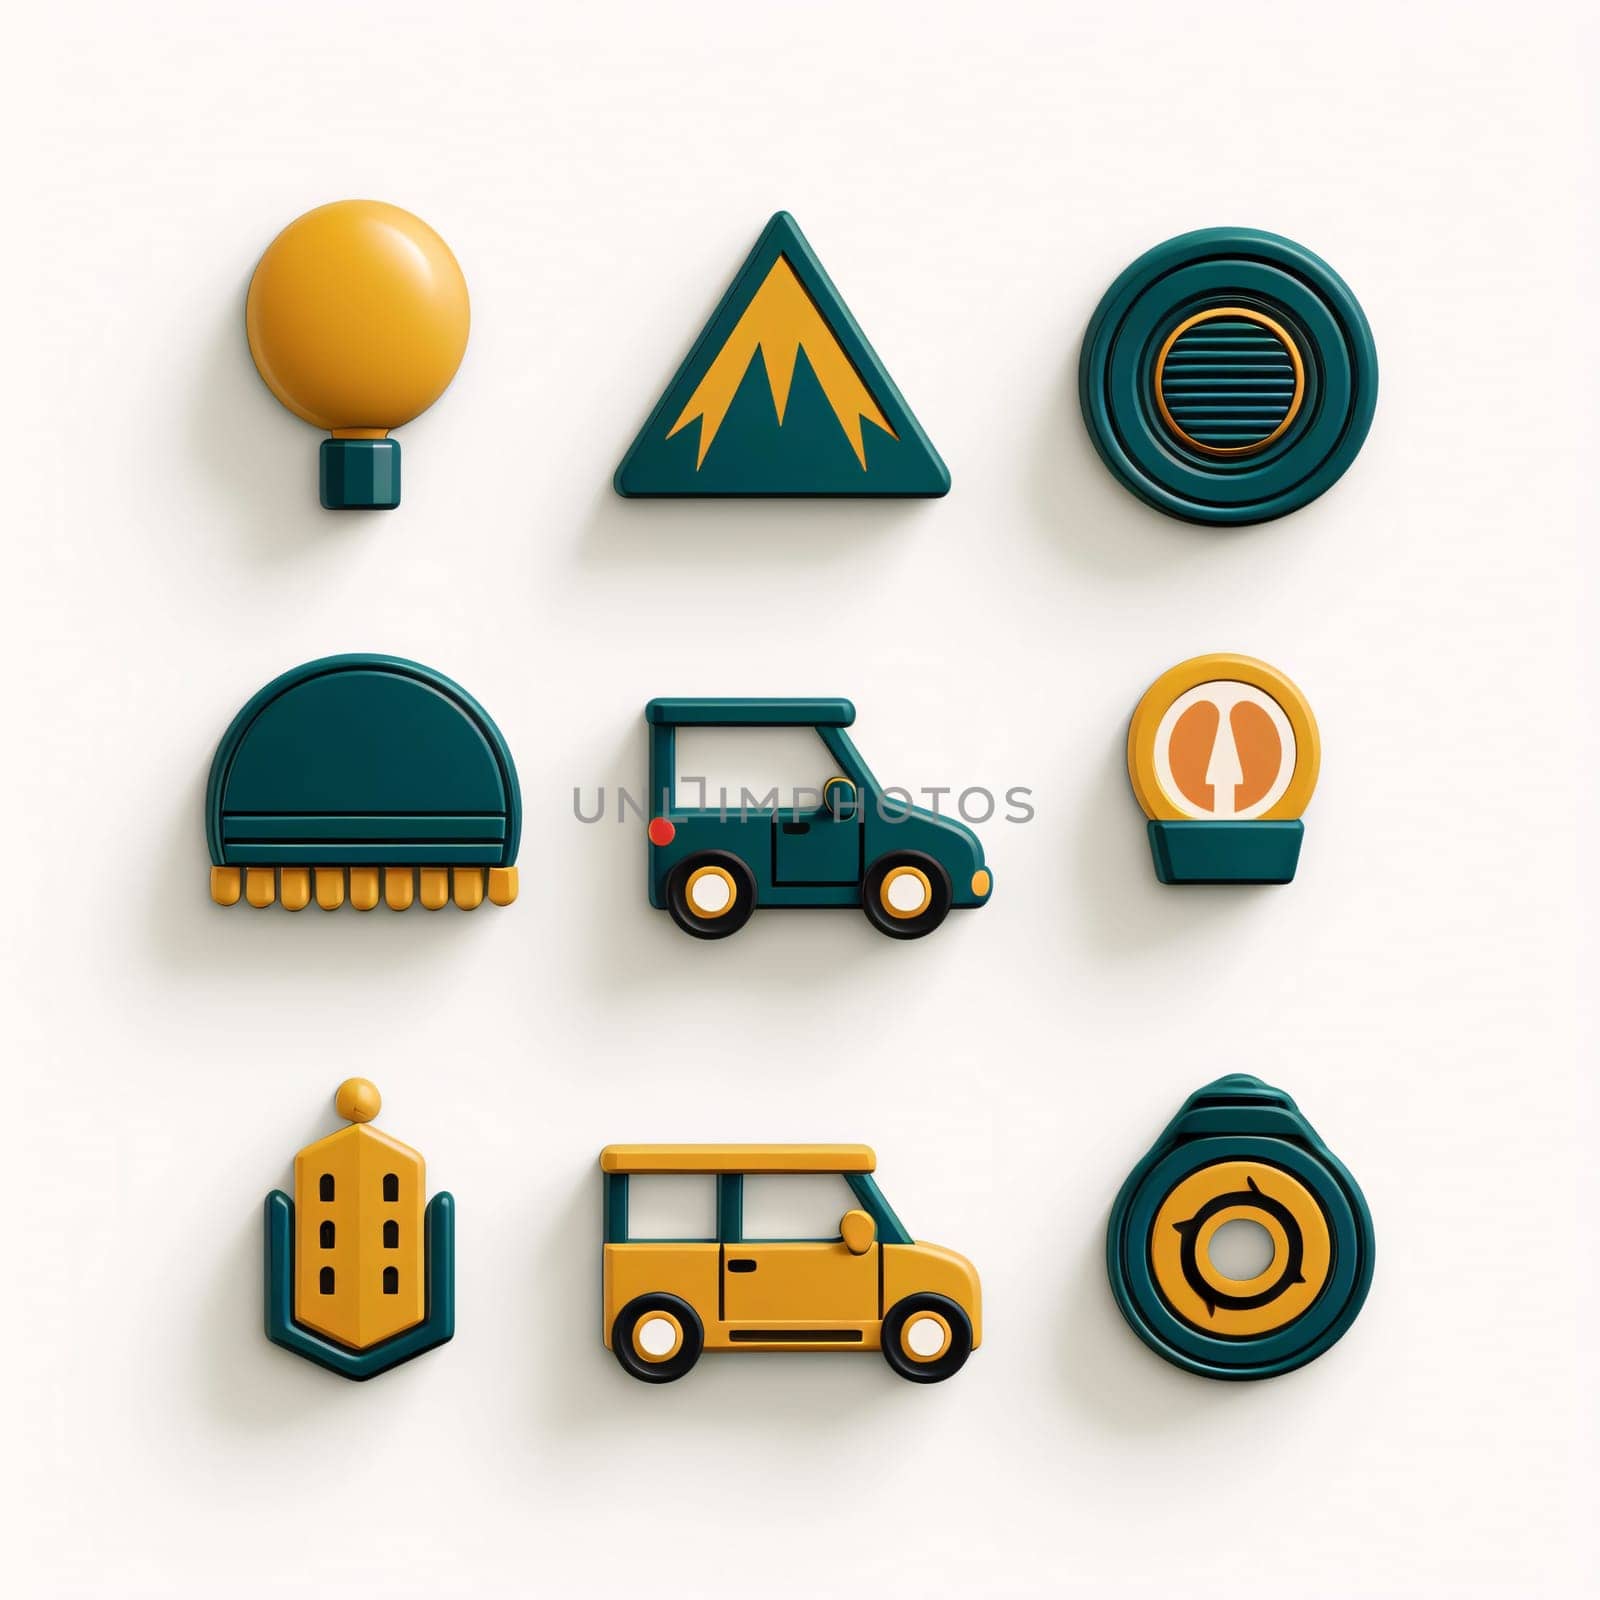 New icons collection: Set of camping icons isolated on white background. 3d illustration.